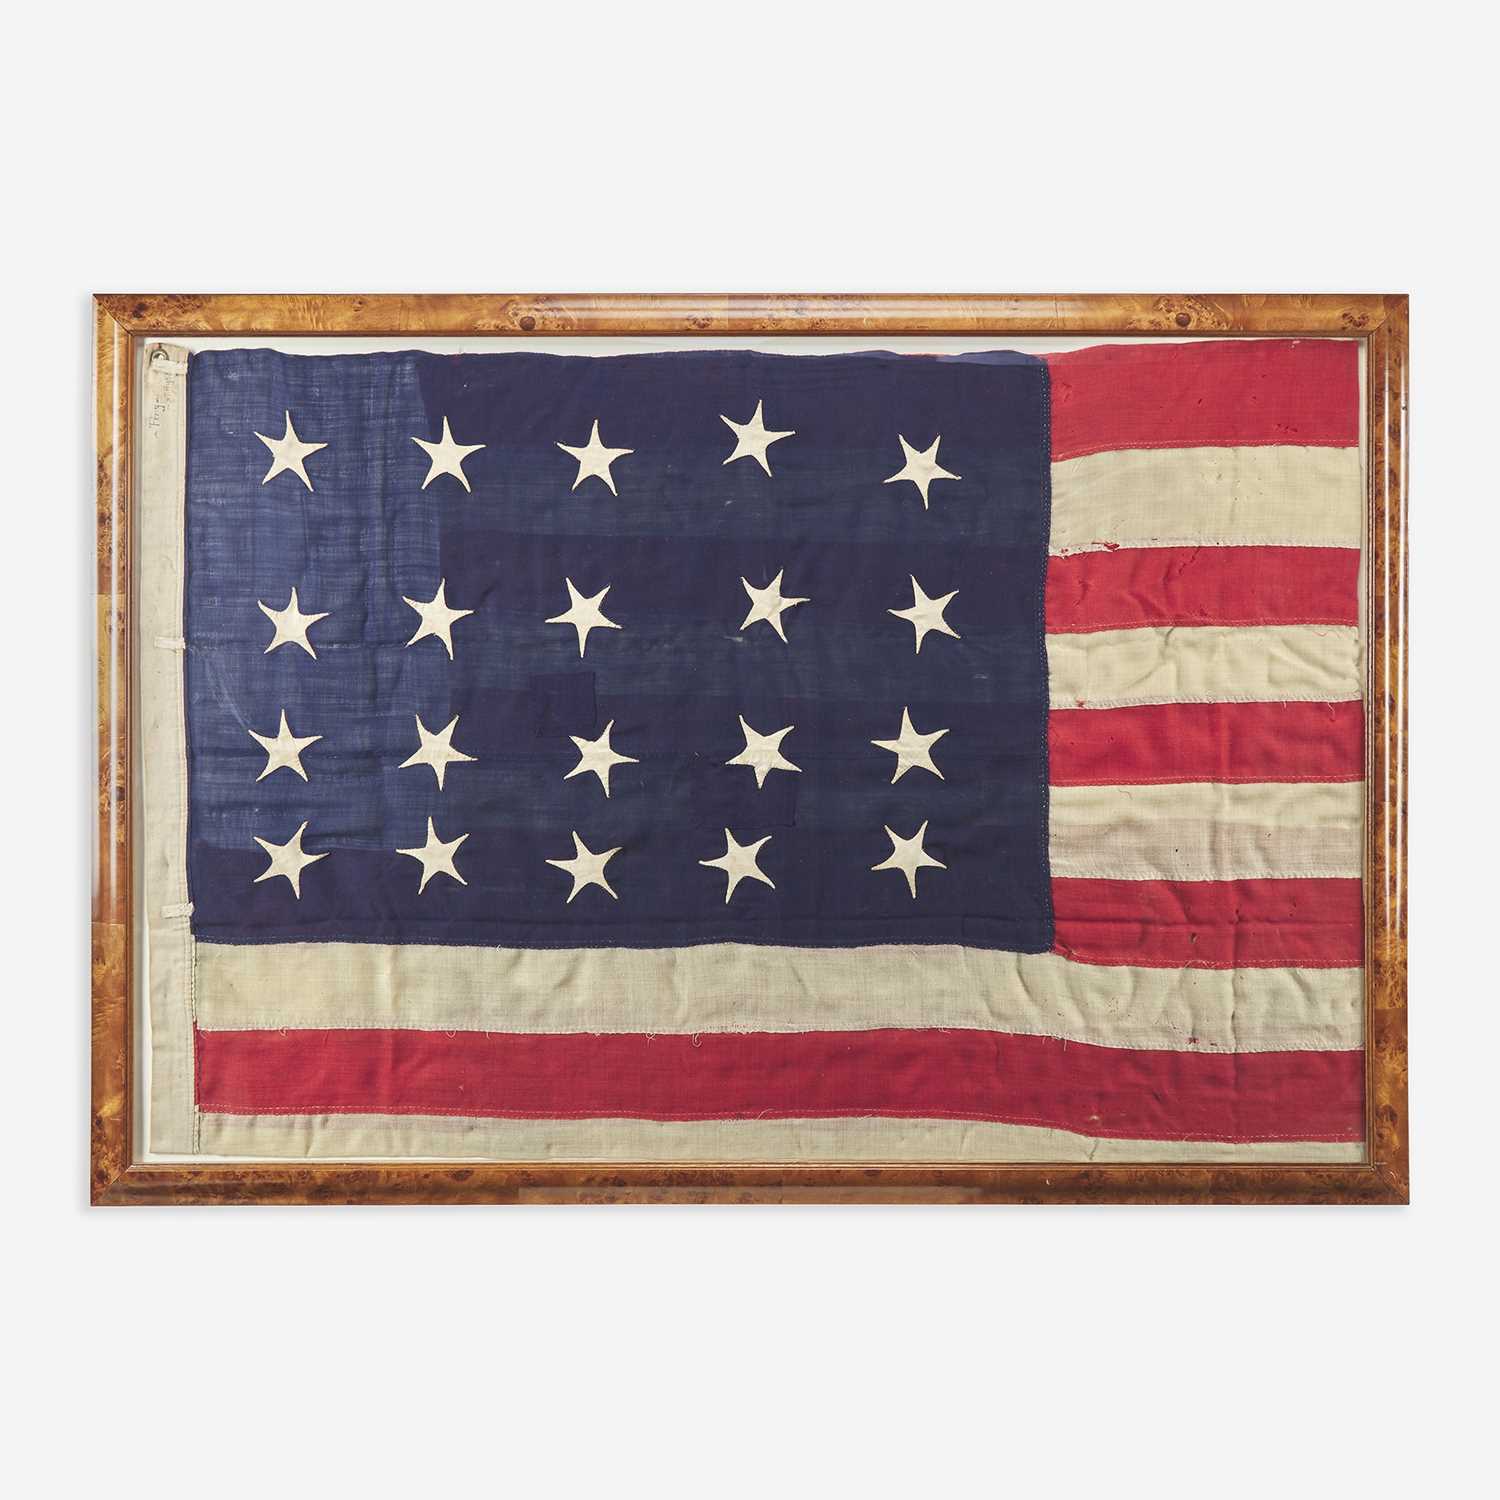 Lot 10 - A 20-Star American National Exclusionary Flag